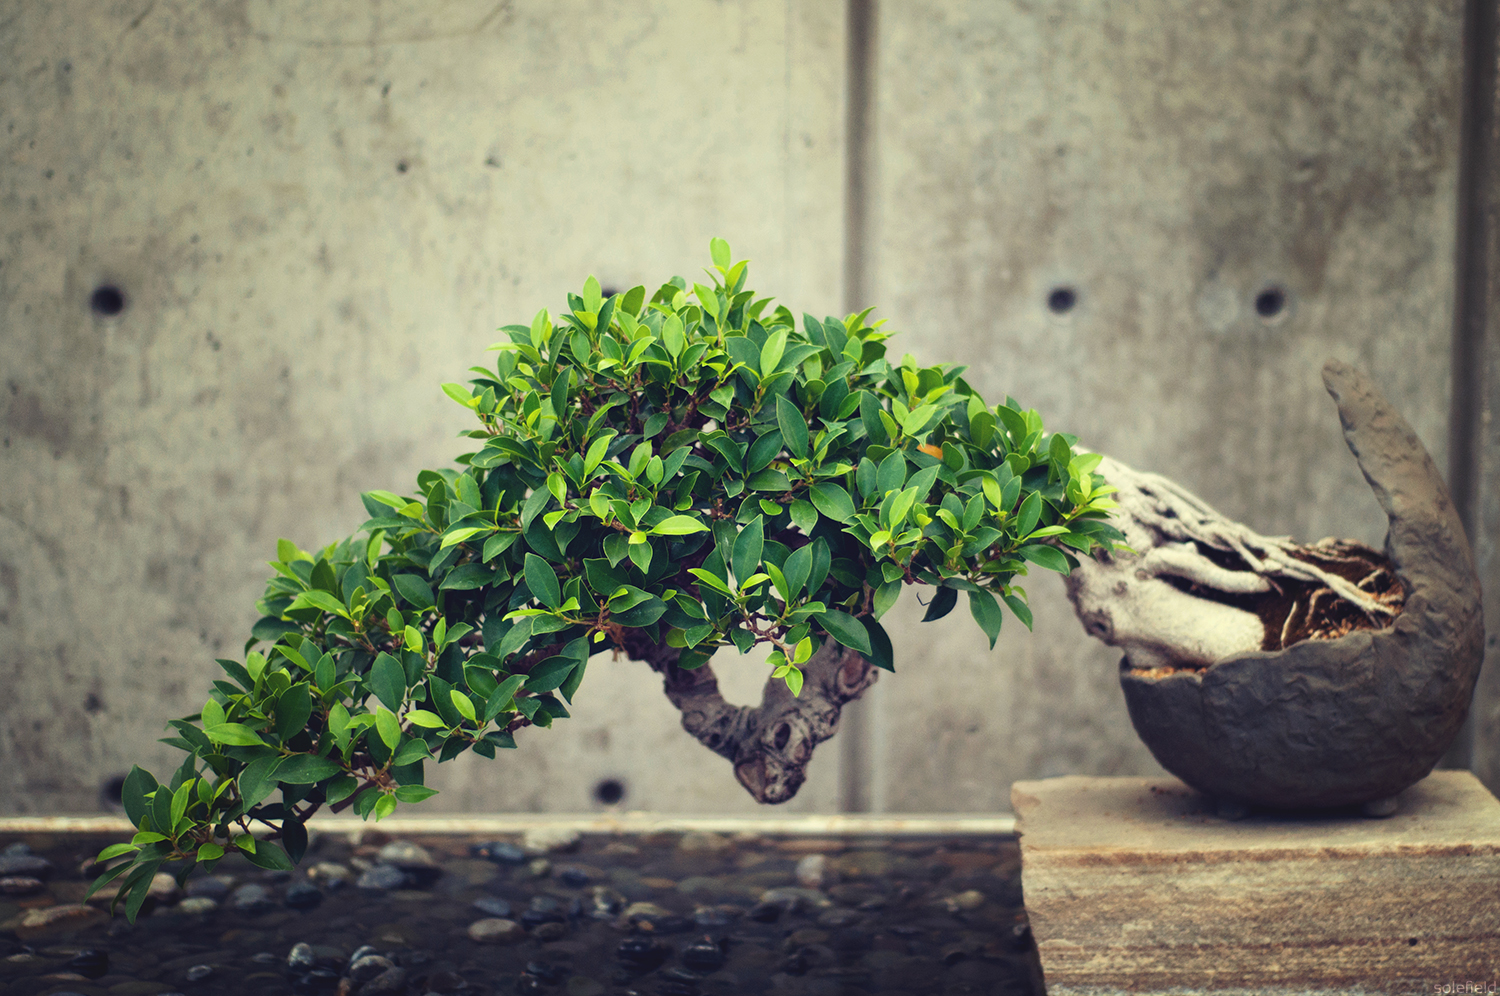 Bonsai tree in front of grey wall